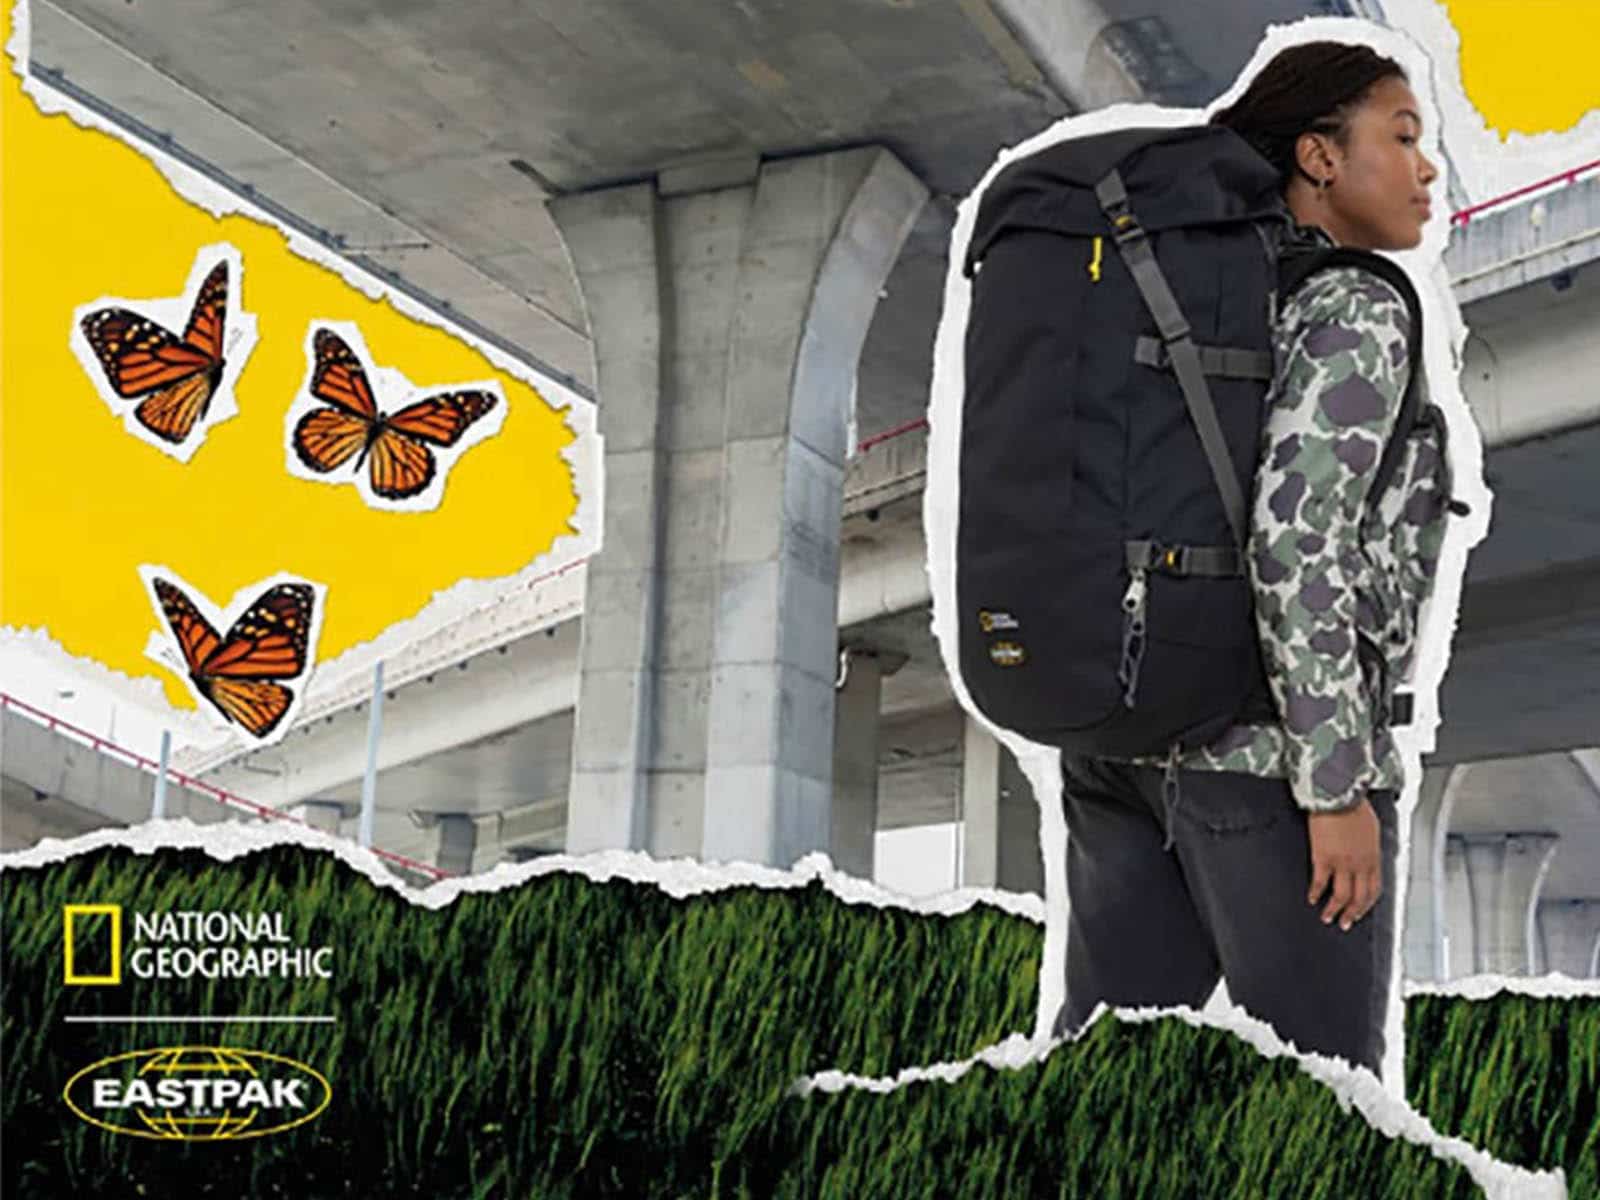 Eastpak and National Geographic collaborate for planet Earth